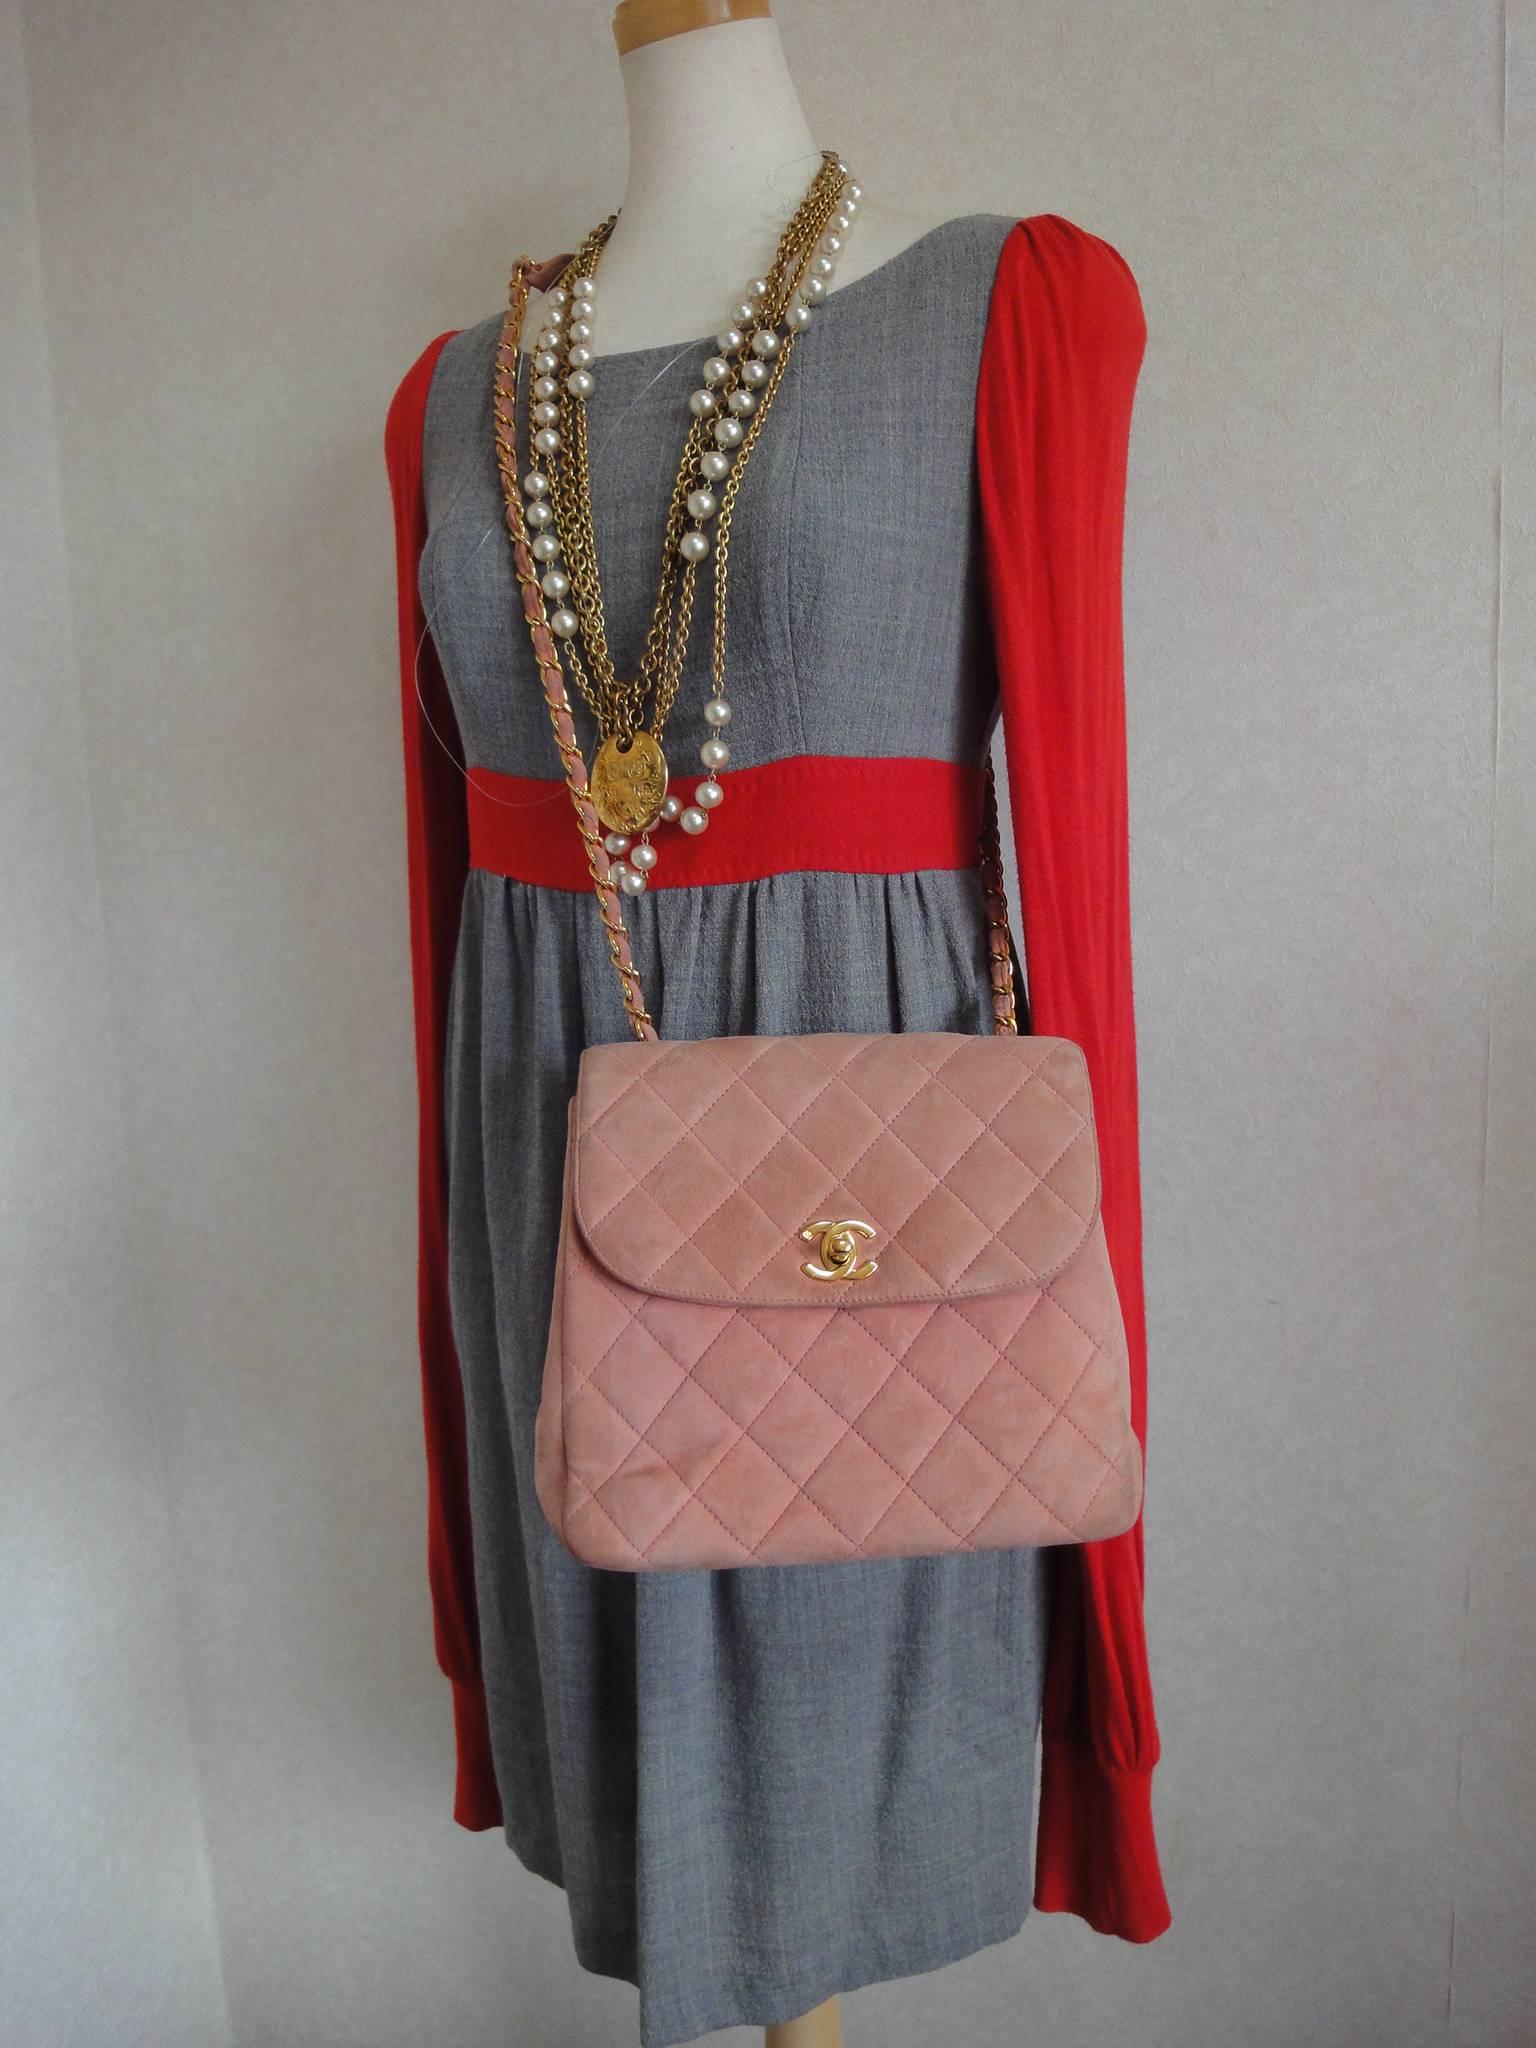 Vintage CHANEL light pink quilted suede 2.55 shoulder bag with gold tone chain For Sale 2